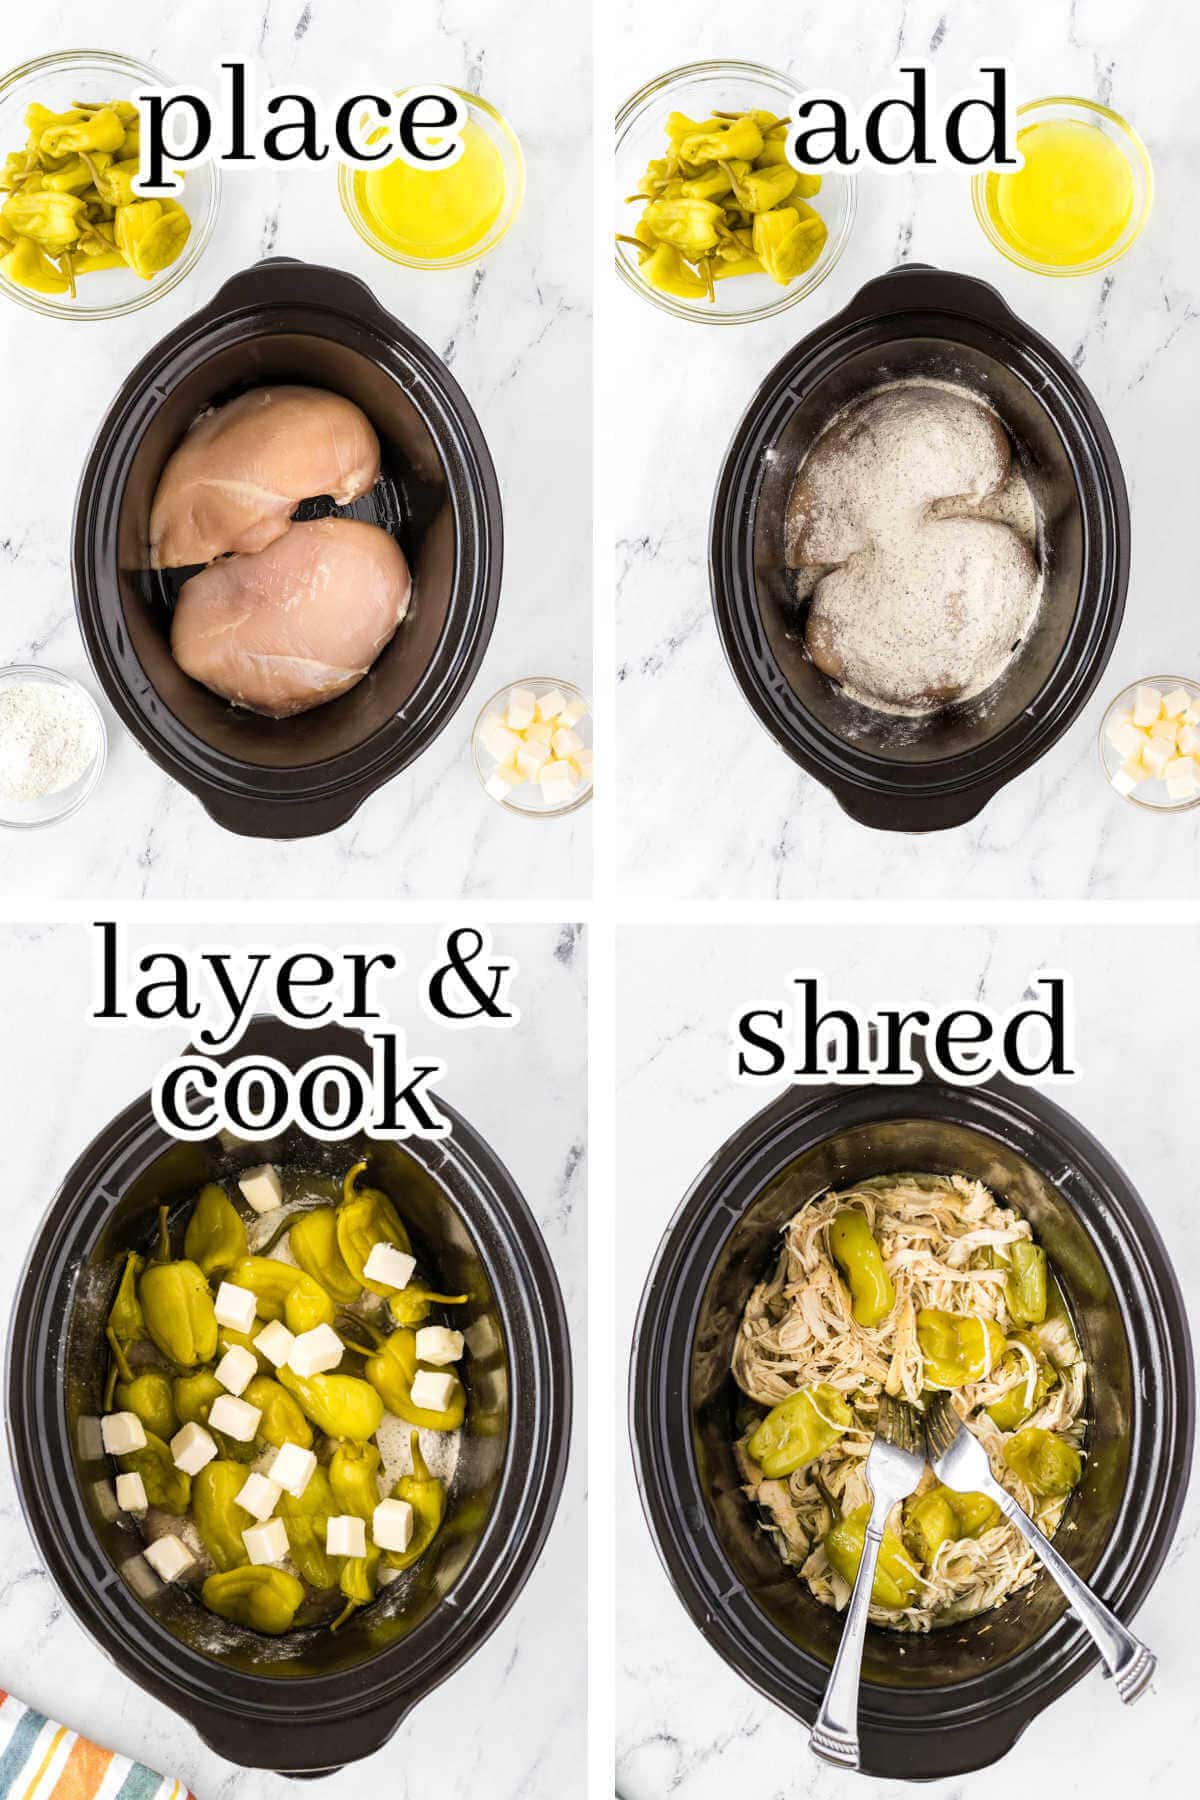 Instructions to make slow cooker recipe, with print overlay.